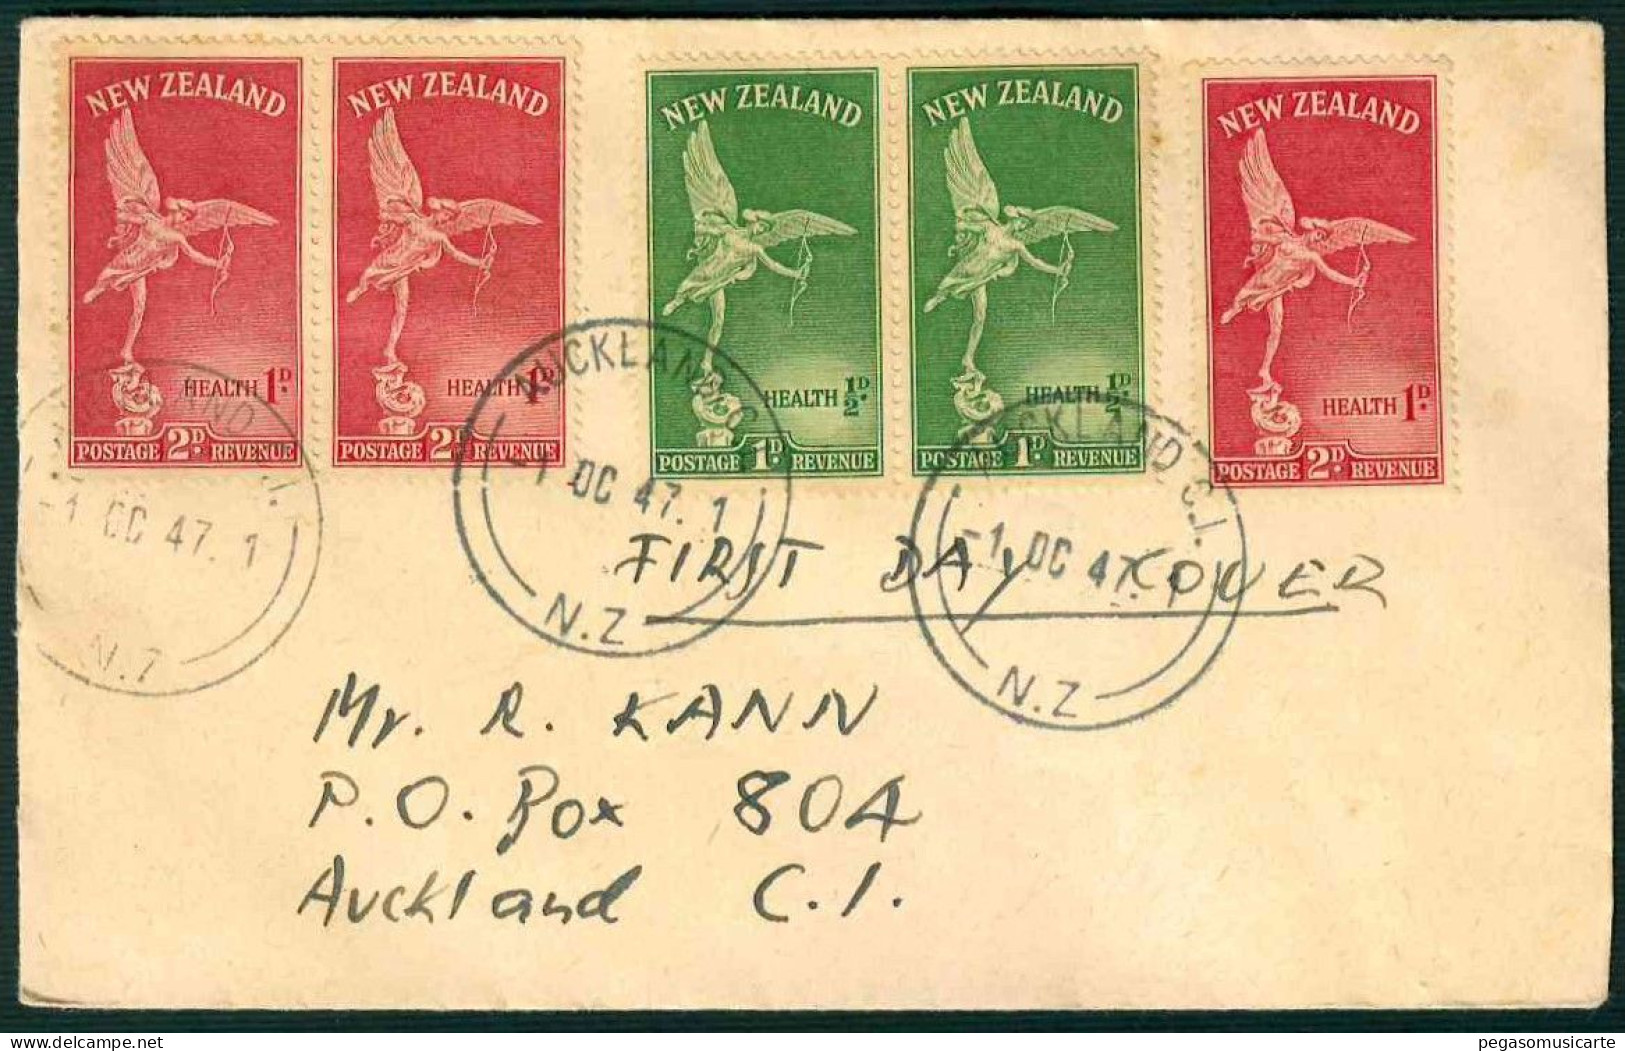 VX377  - NEW ZEALAND 1947 - FIRST DAY COVER - AUCKLAND - Covers & Documents